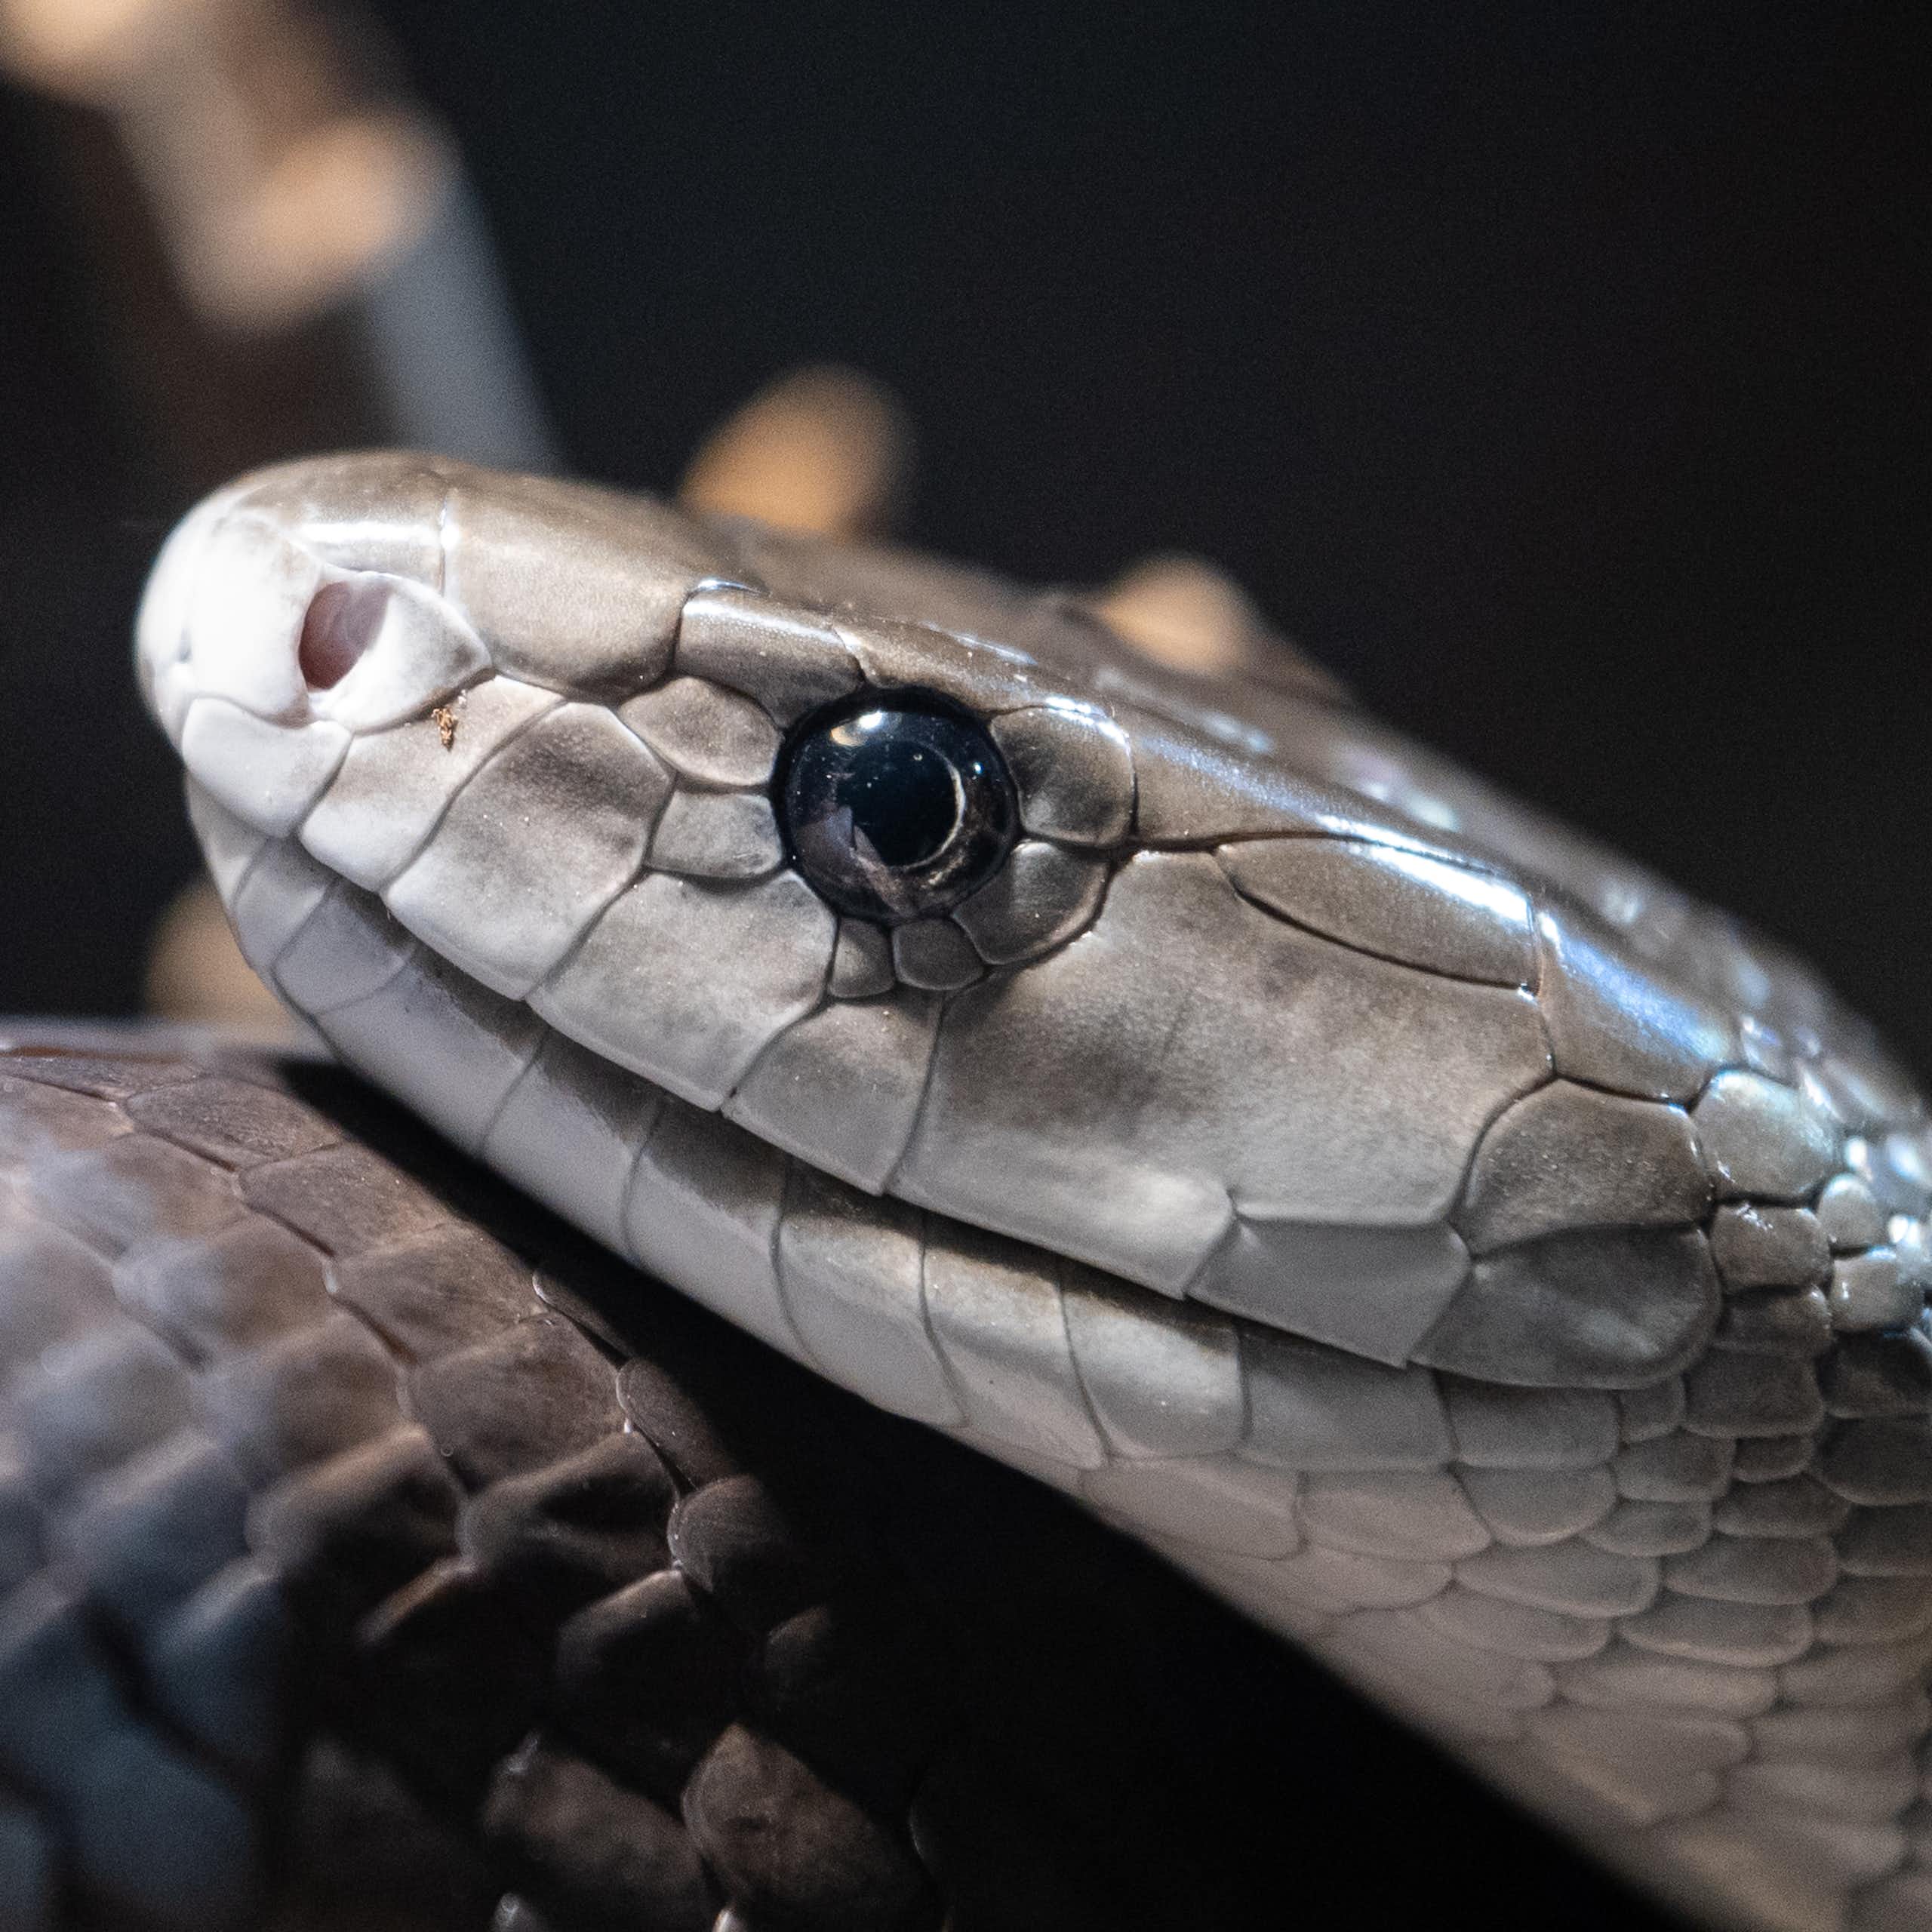 Closeup photo of snake's head and part of its body